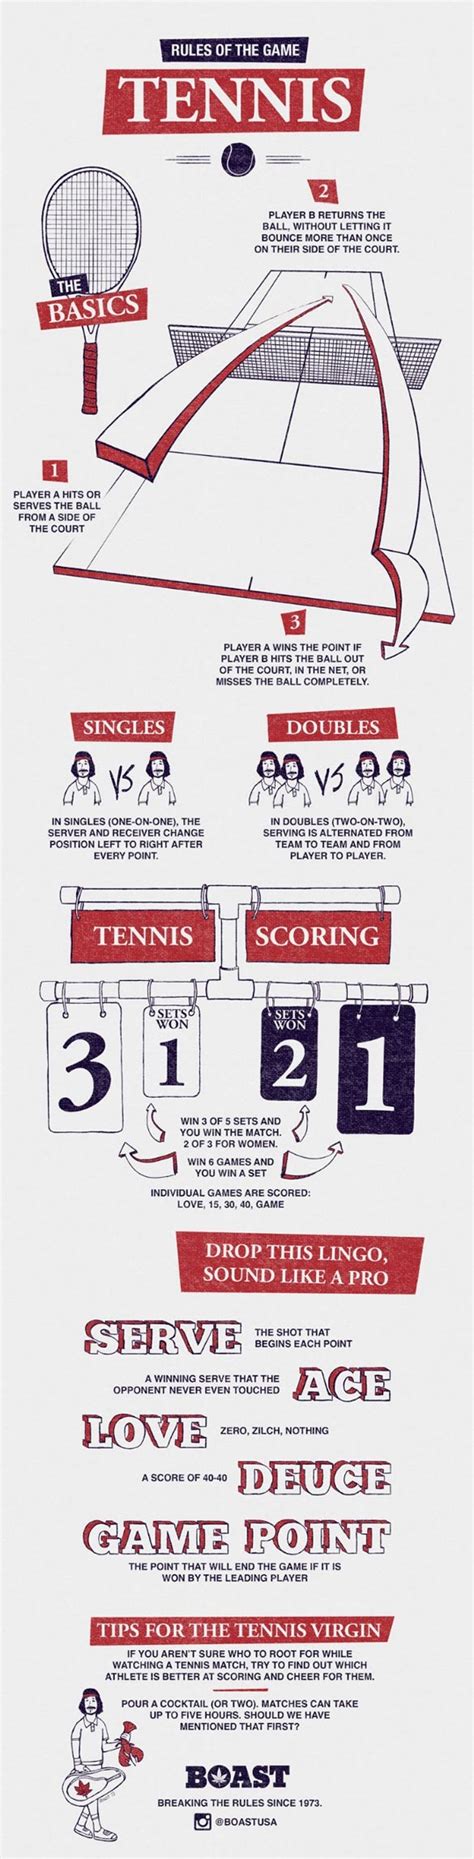 1.5 the playing surface shall be considered to include the top edges of the table, but not the sides of the table top below the edge. Tennis Rules: How to Keep Score and Play